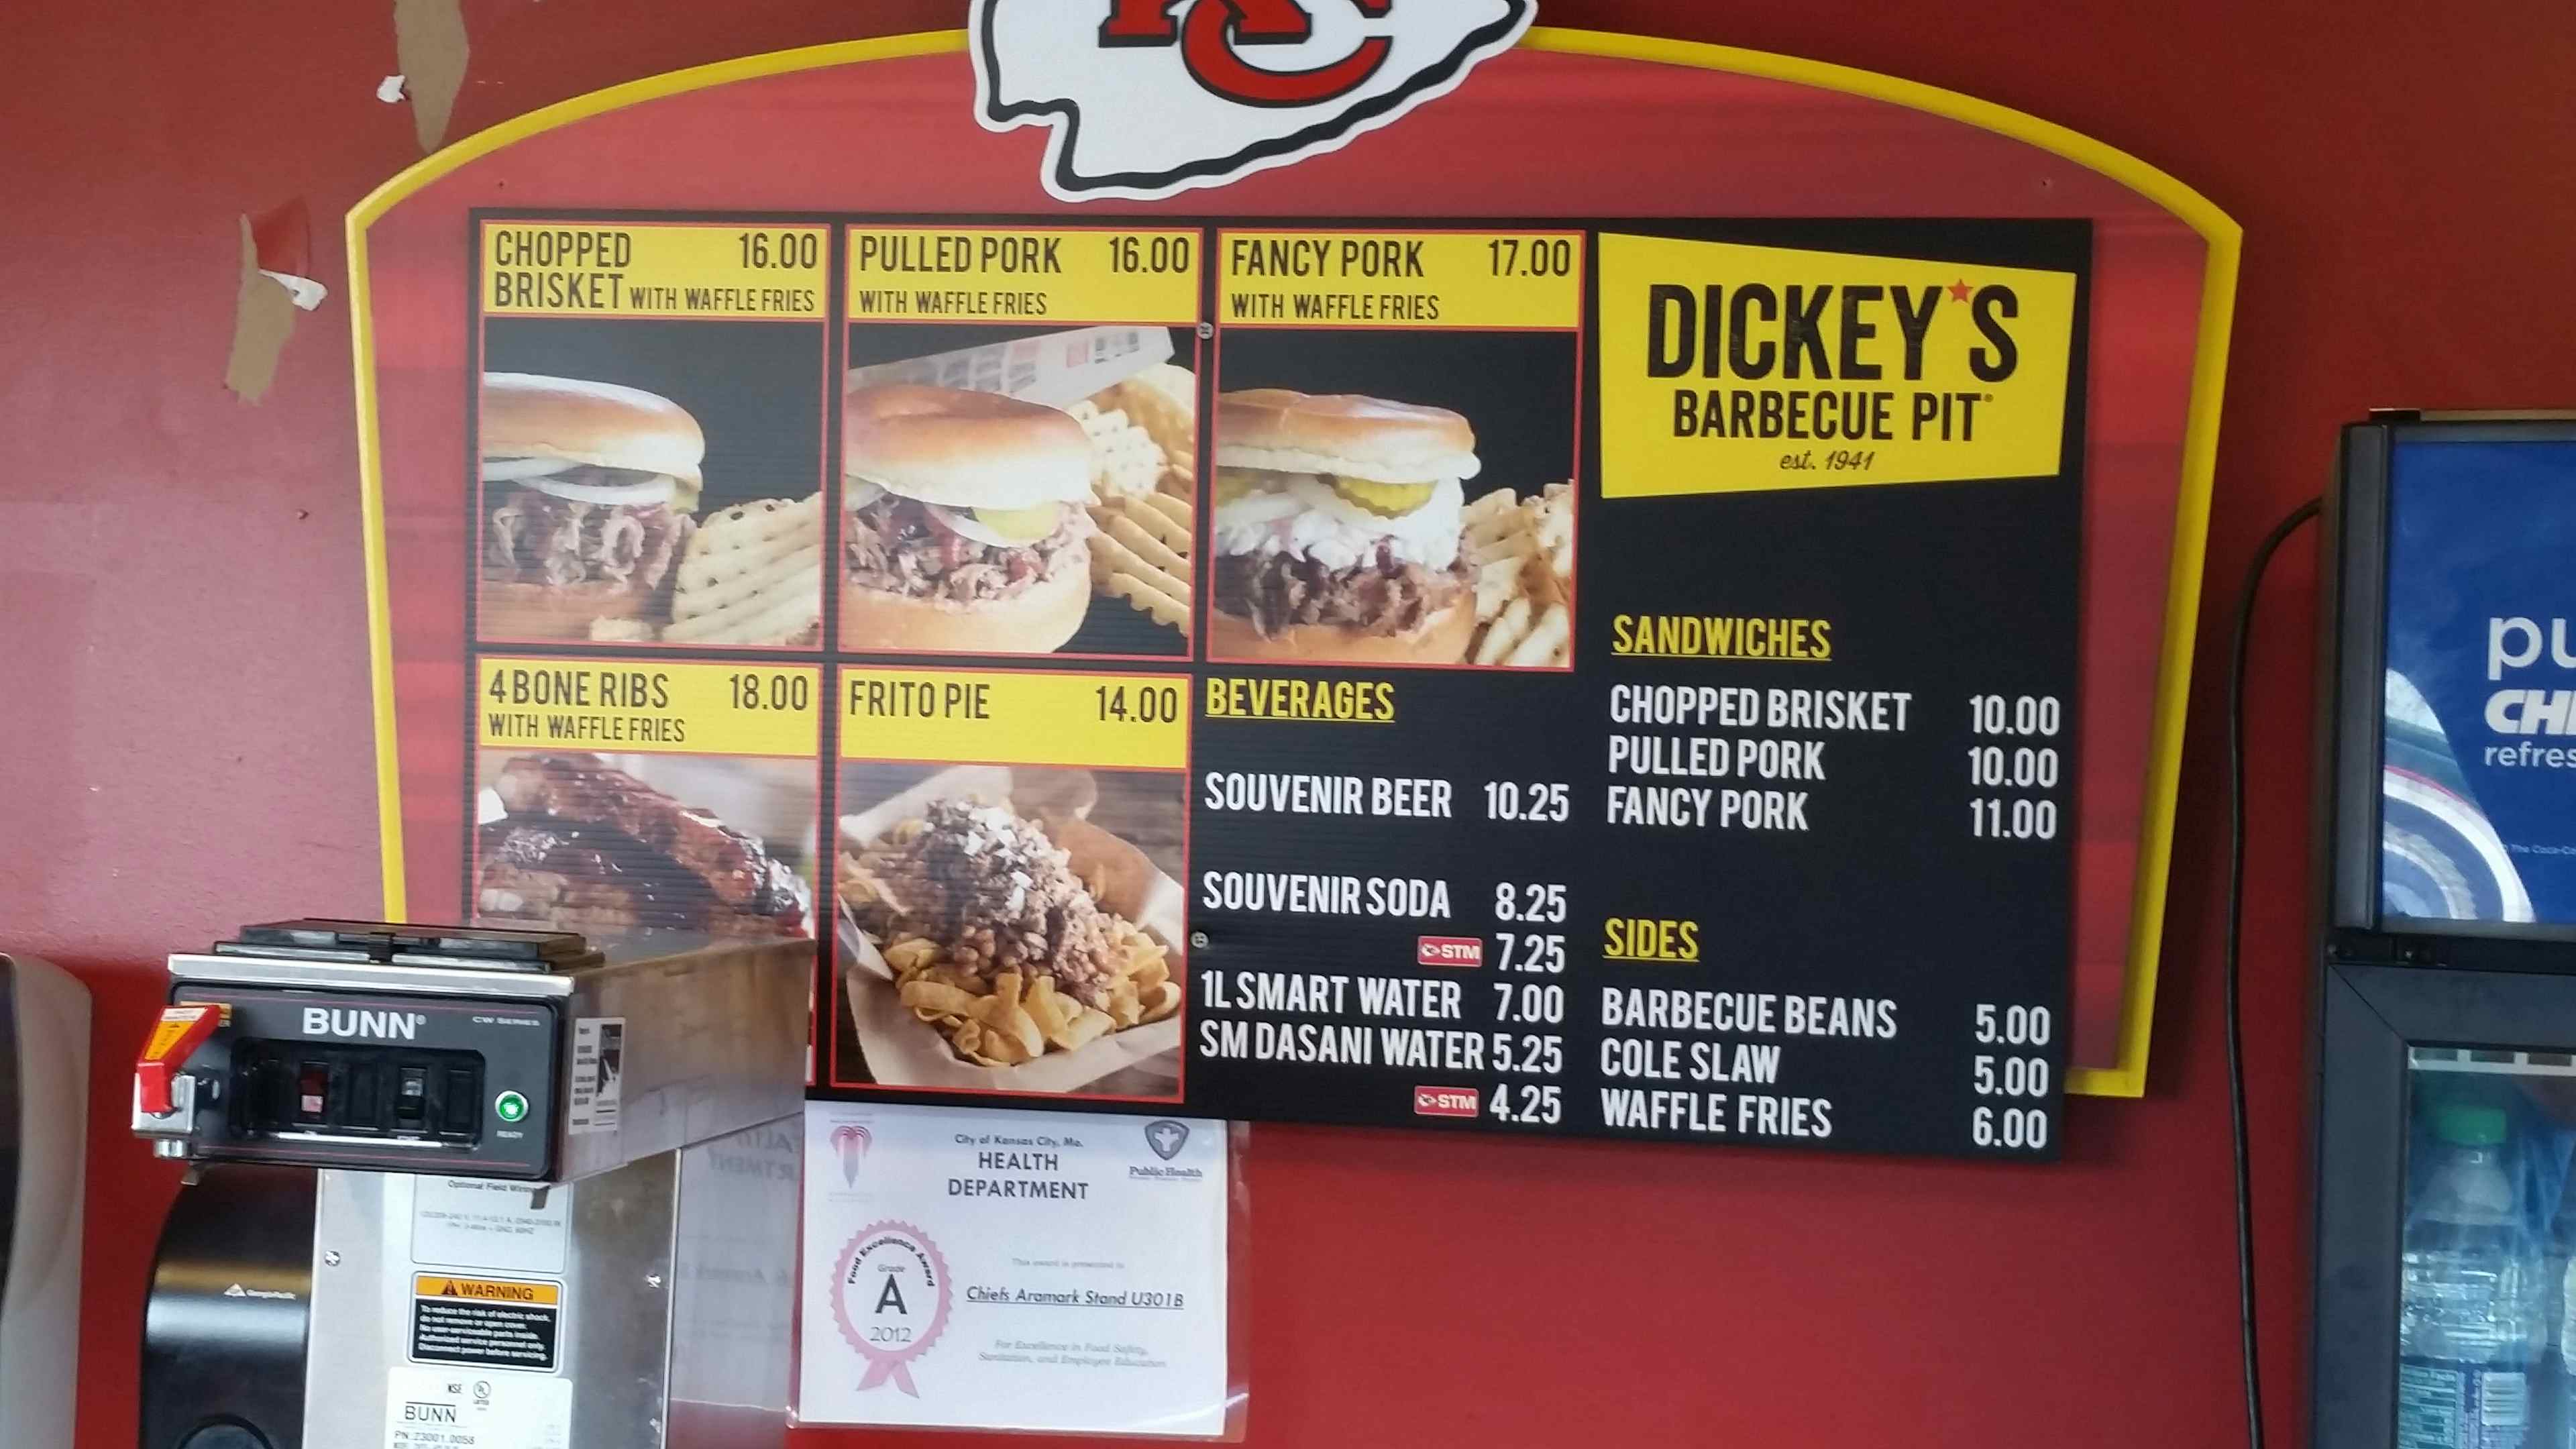 WIBW: New additions to Arrowhead Stadium concessions announced